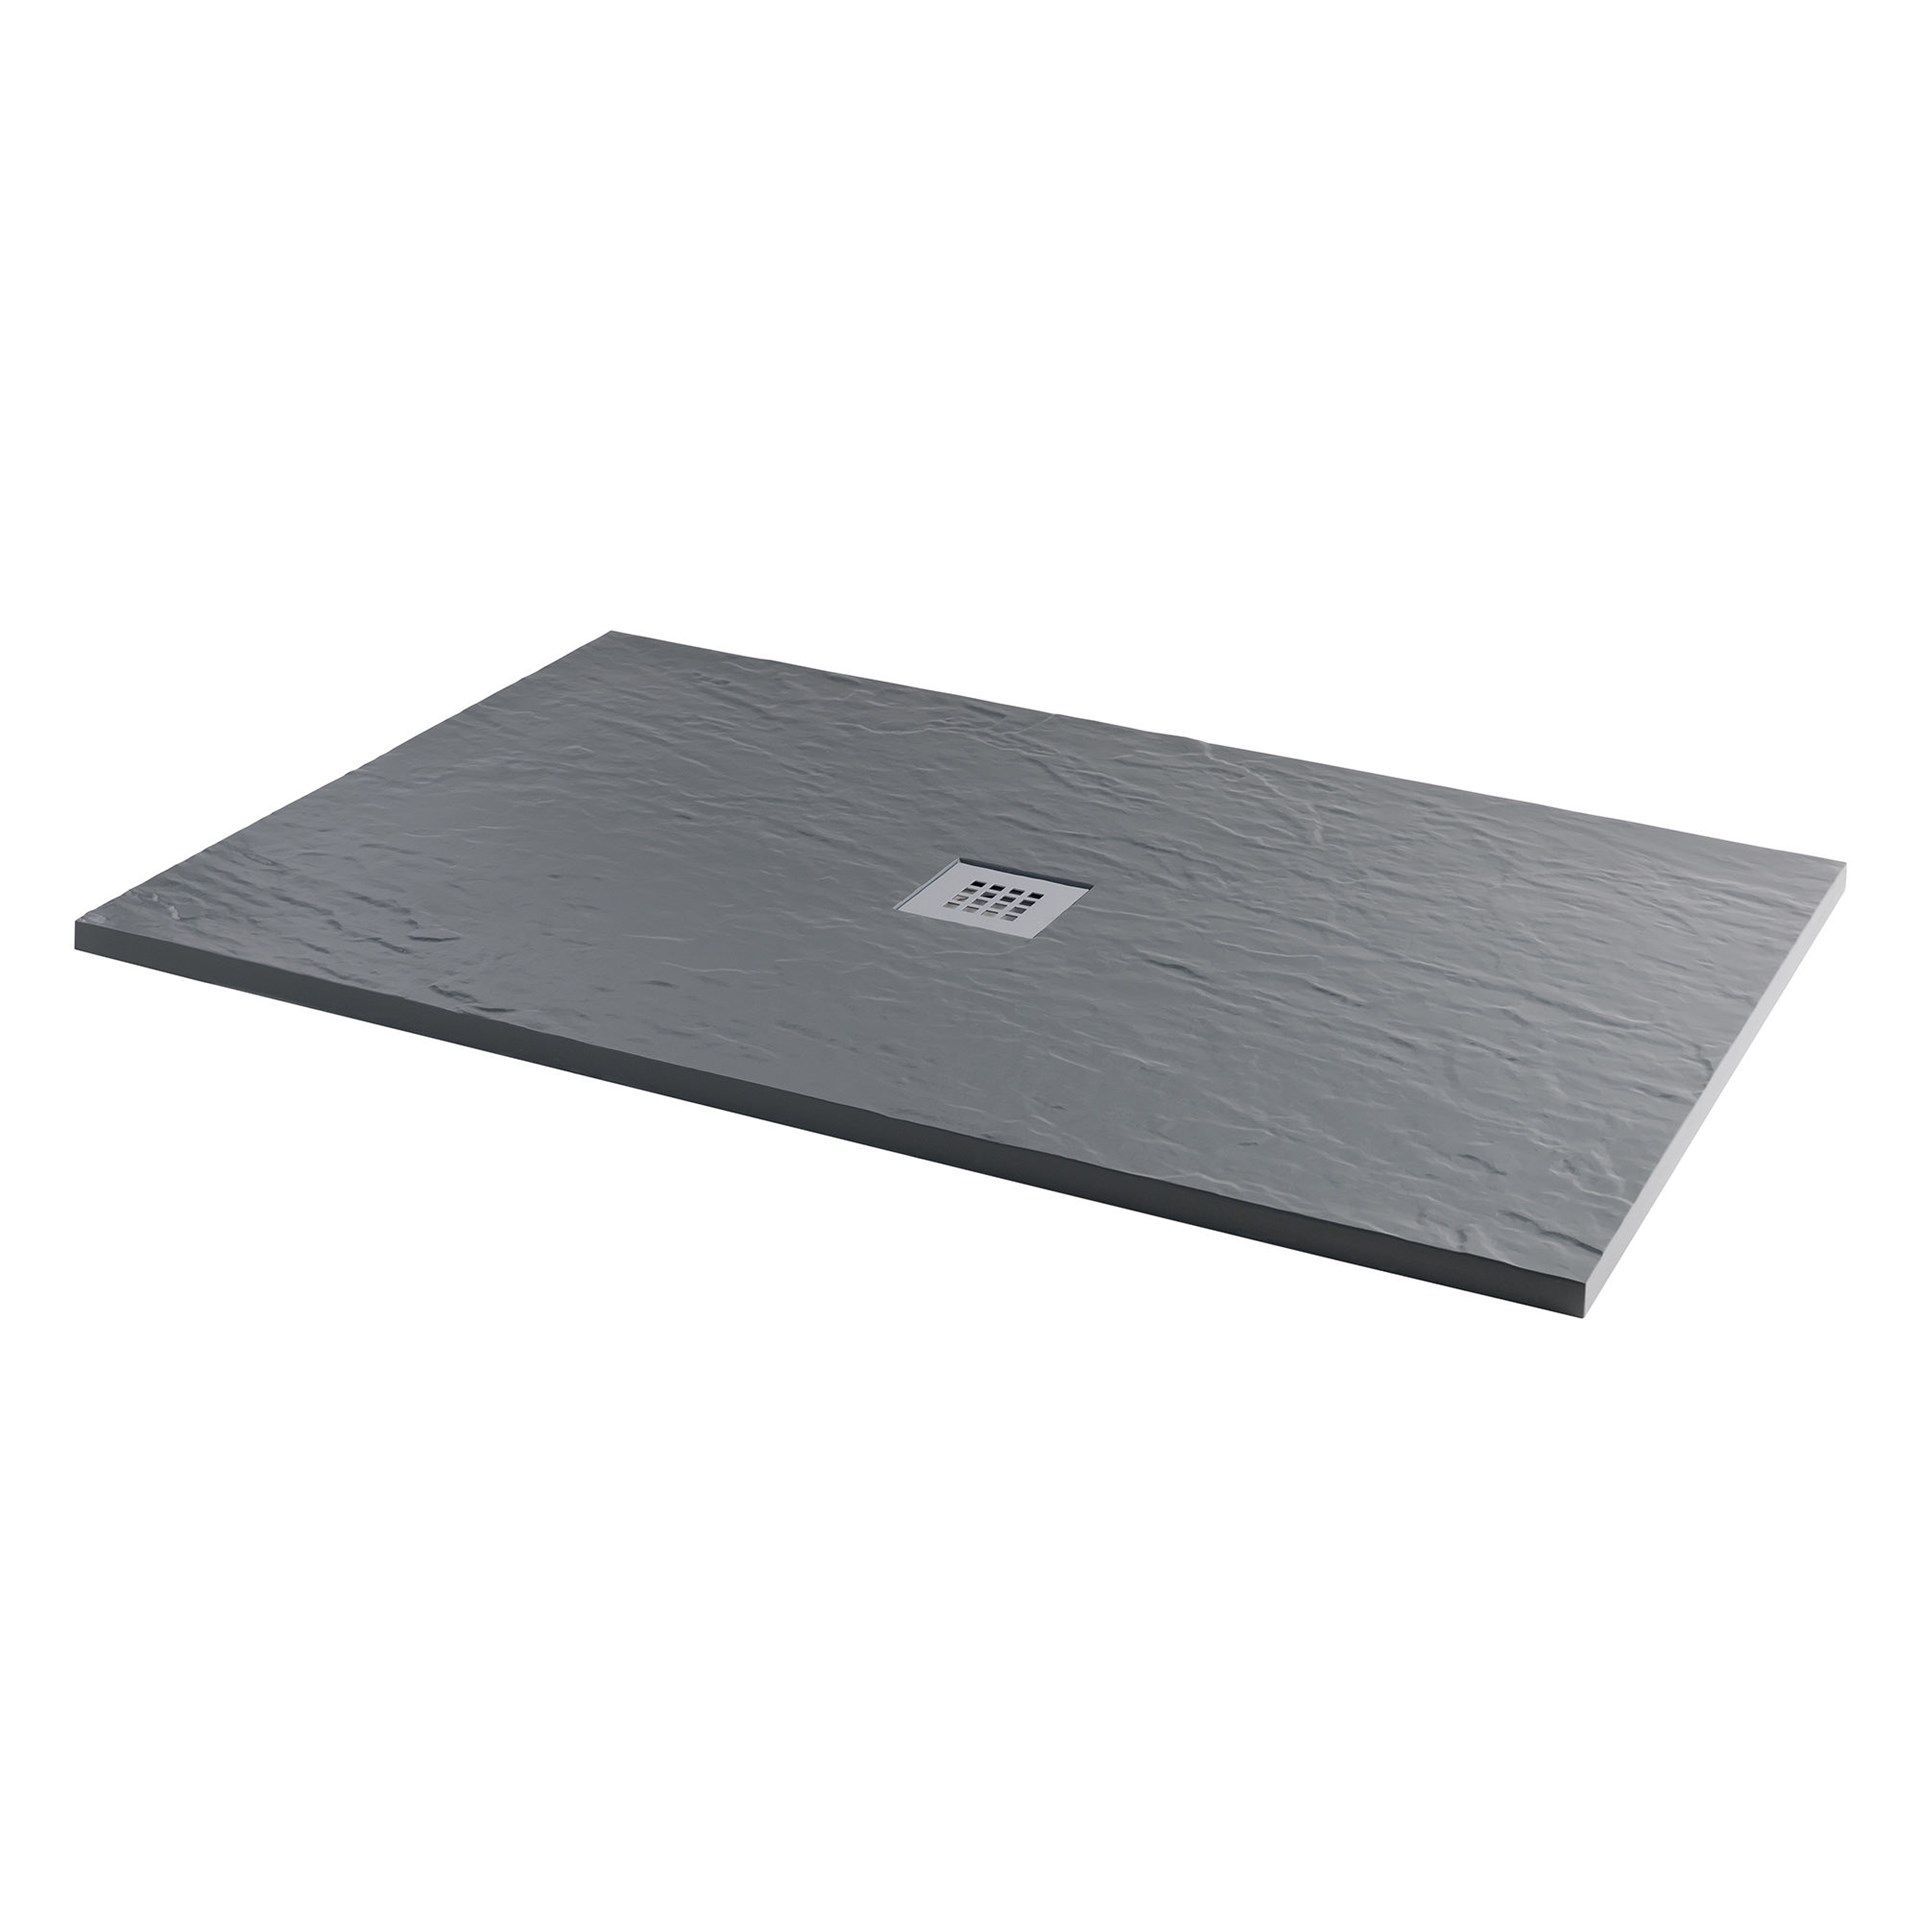 New (F67) 1400x900mm Rectangular Slate Effect Shower Tray In Grey. Manufactured In The Uk From... - Image 2 of 2